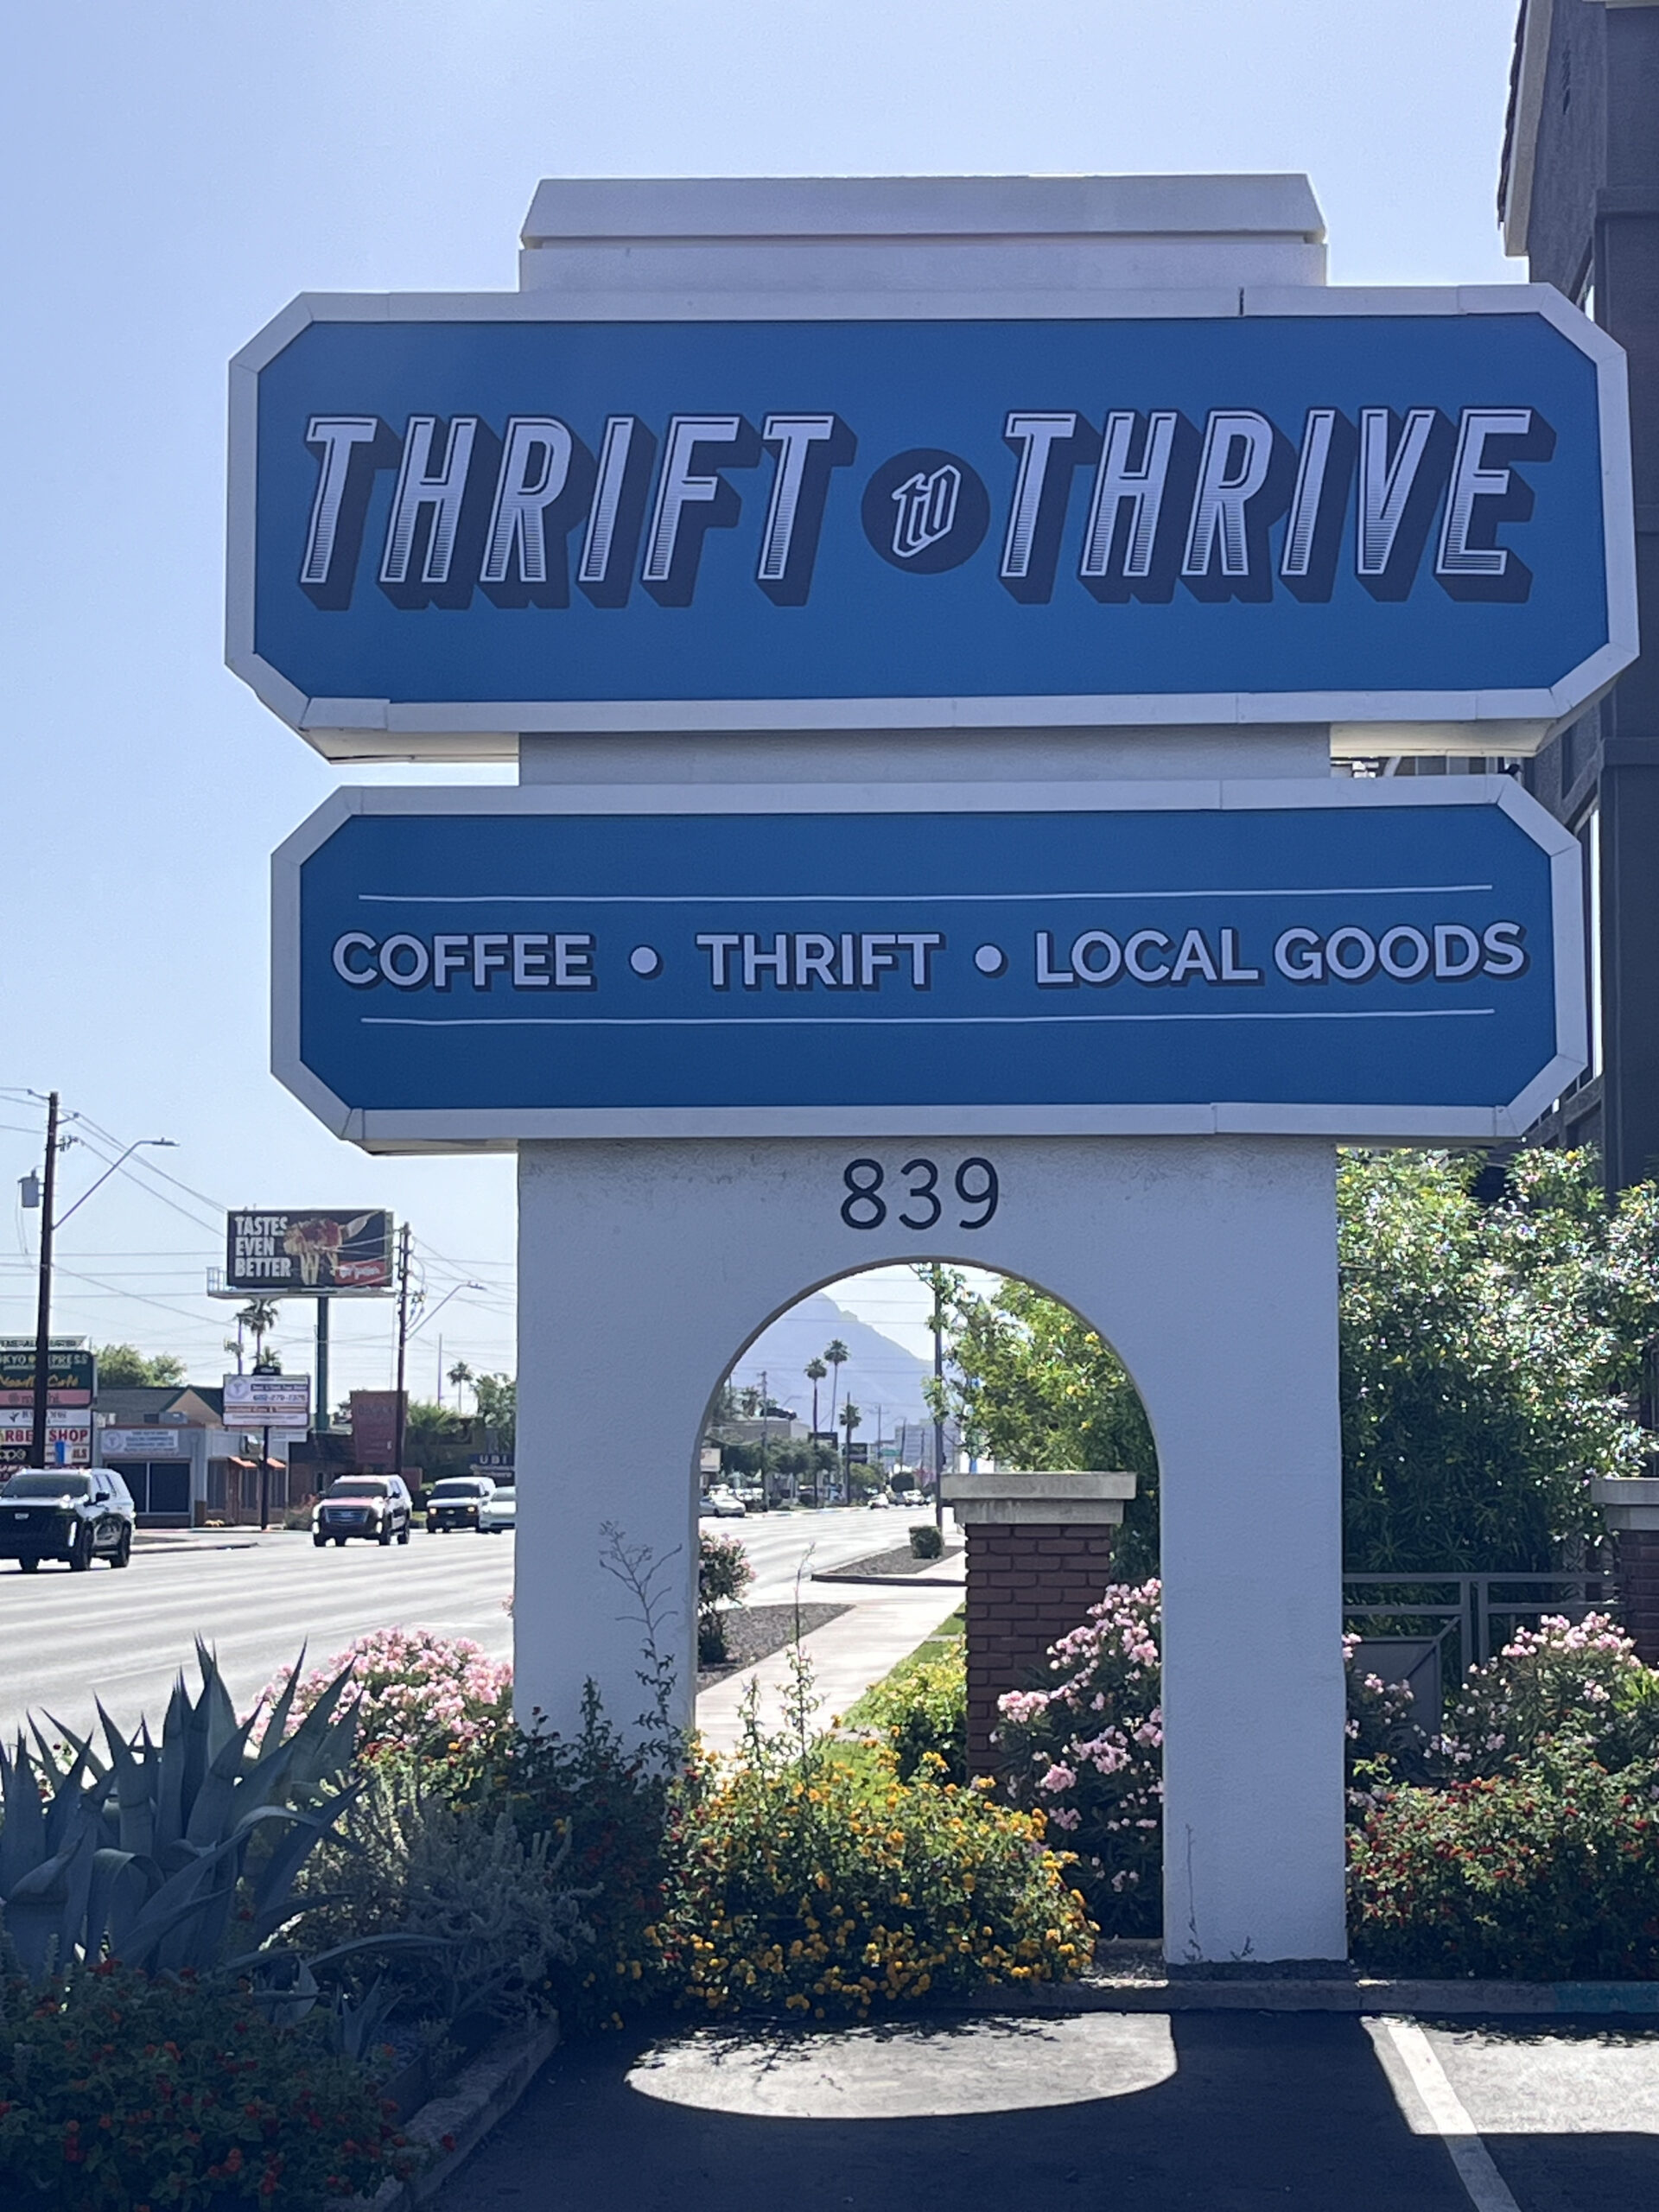 Thrift to thrive sign